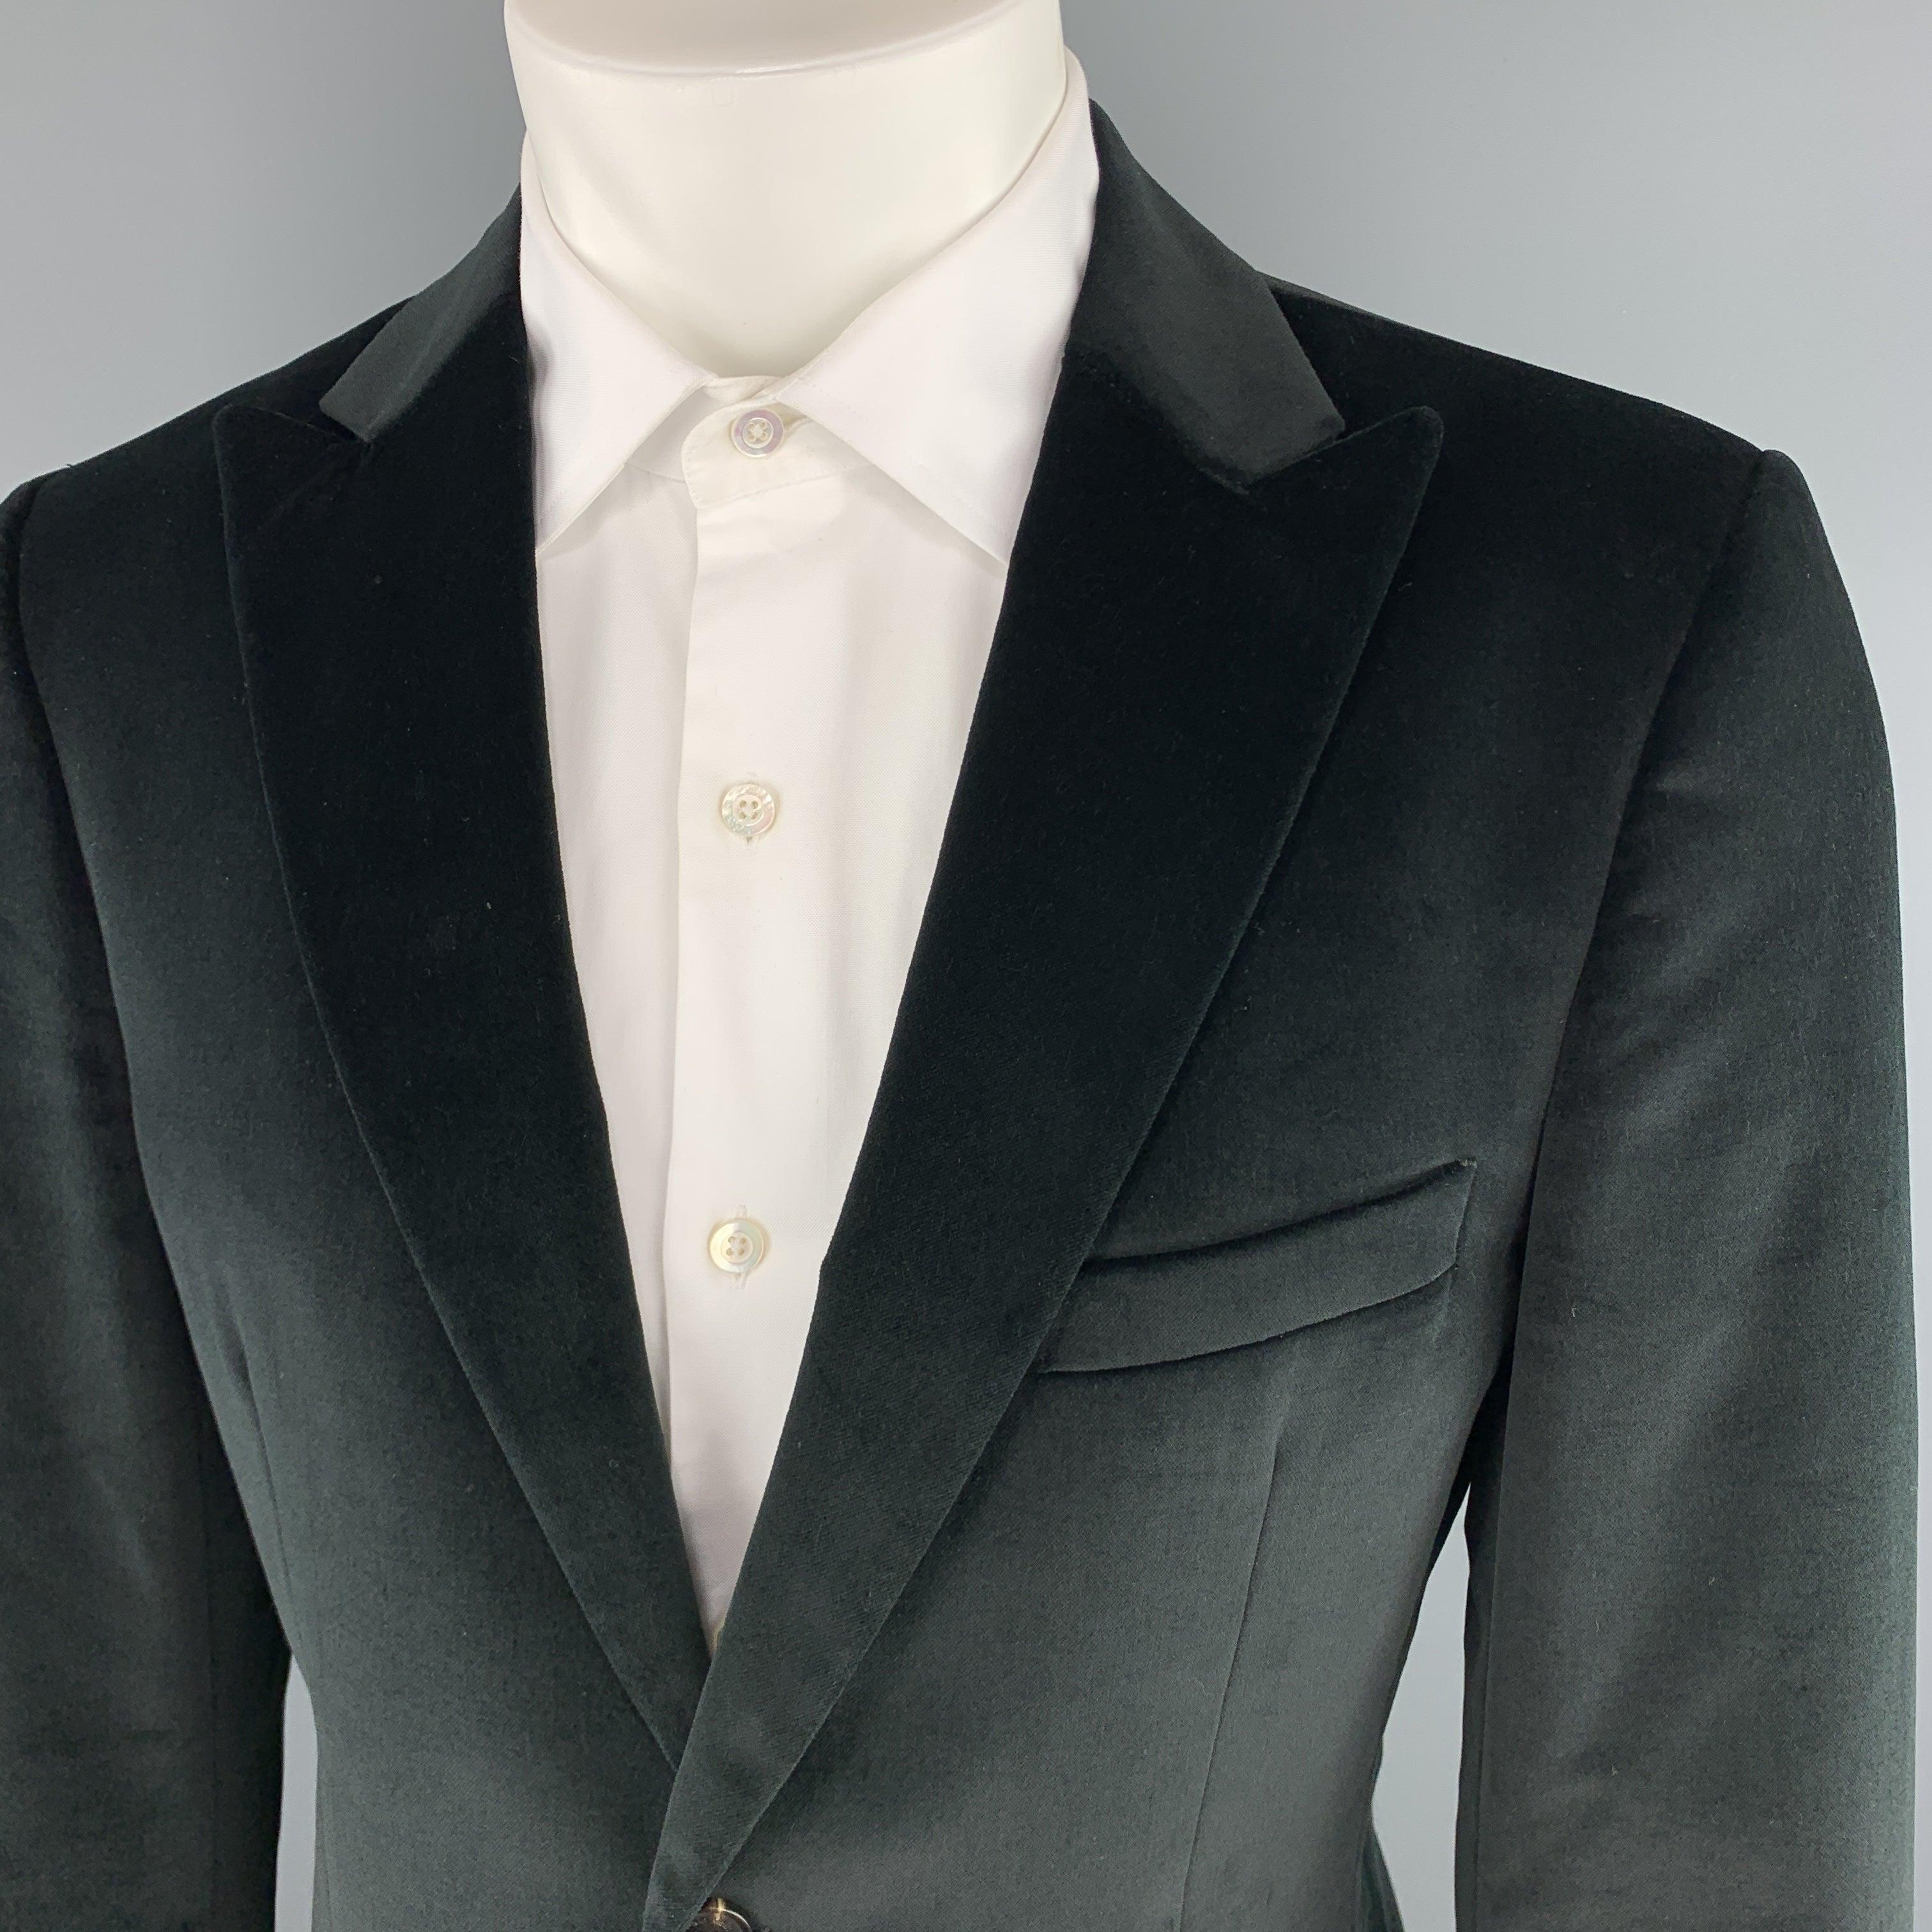 CALVIN KLEIN COLLECTION
sport coat comes in black velvet with a peak lapel, single breasted, two button front, and double vented back.Excellent Pre-Owned Condition. 

Marked:   48 

Measurements: 
 
Shoulder: 17 inches Chest:
42 inches Sleeve:
25.5